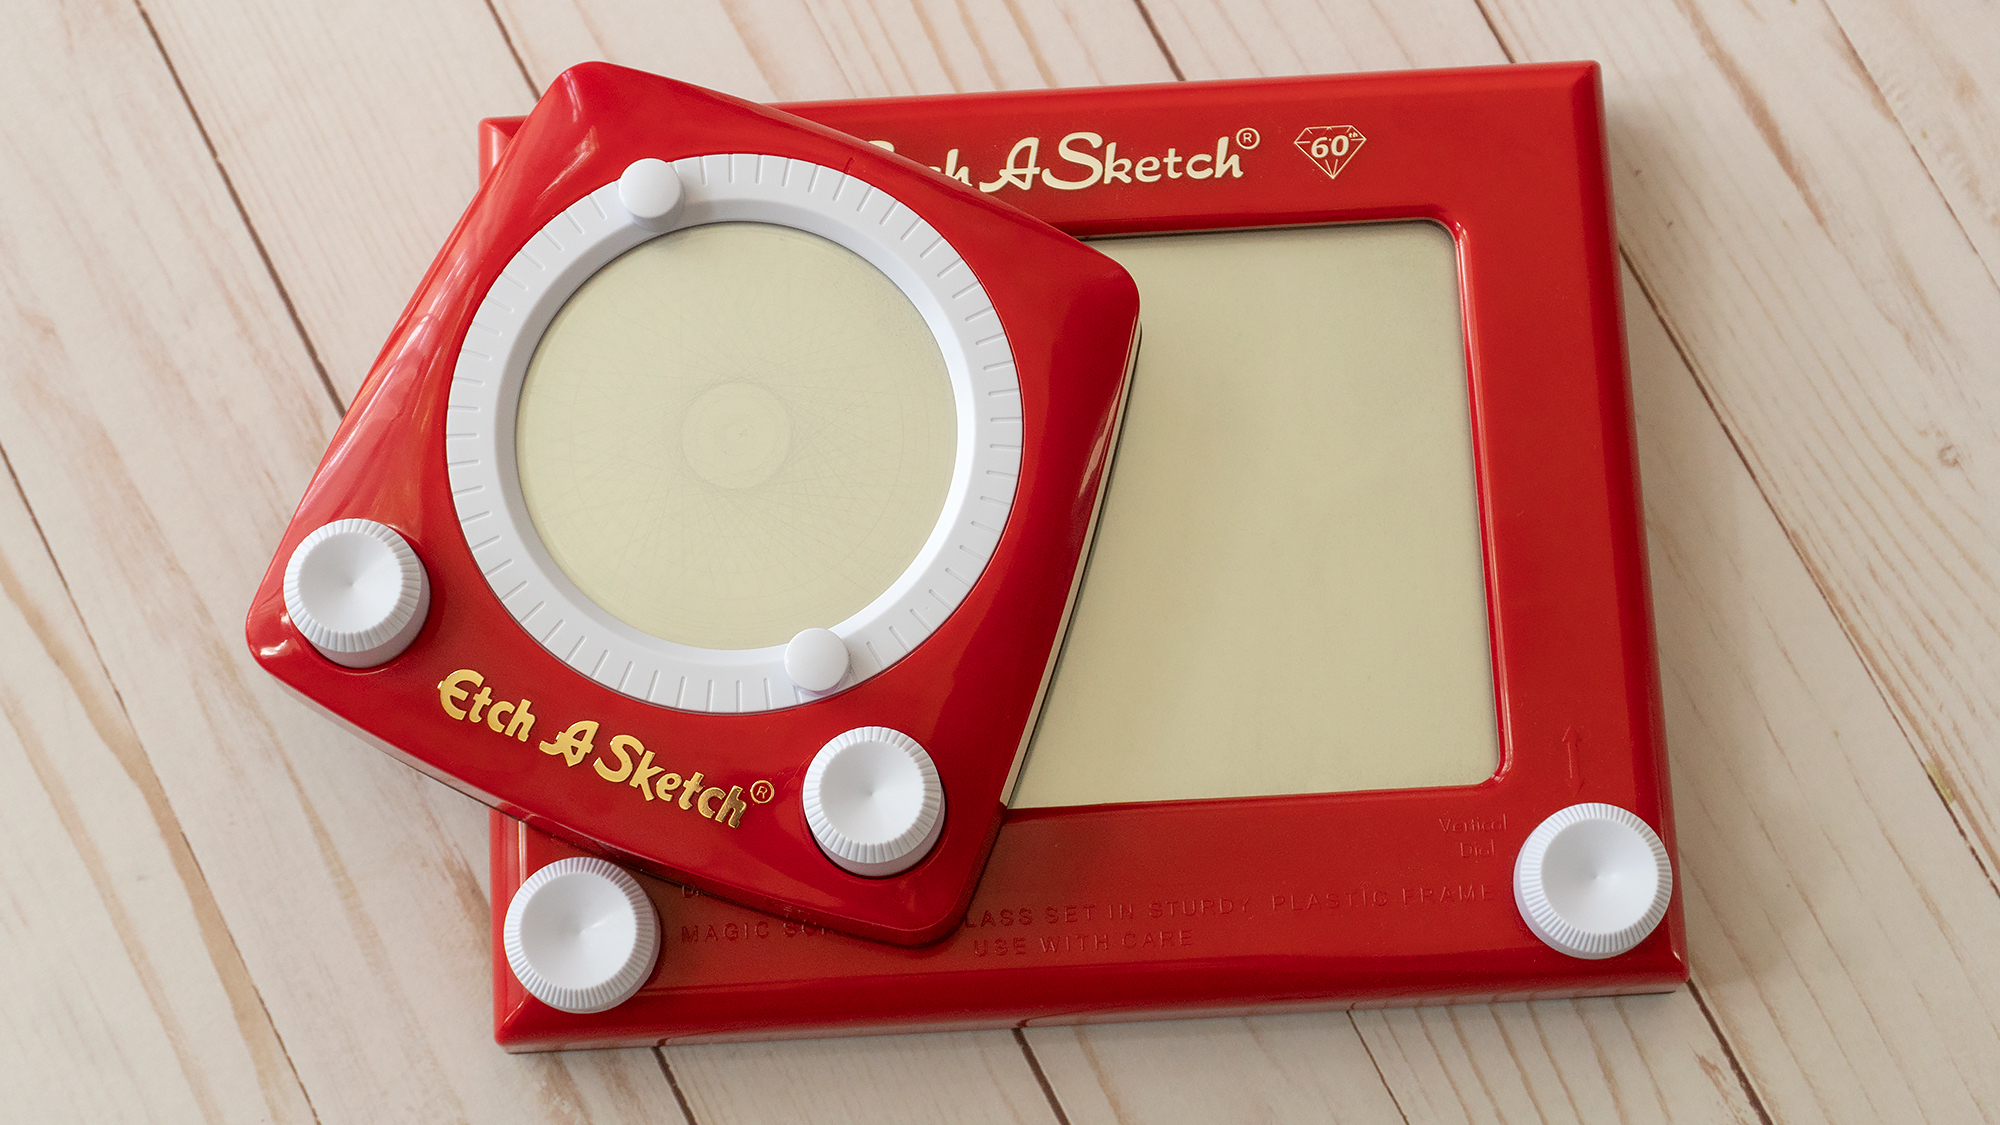 One curious issue with the new Etch A Sketch Revolution is that it was all but impossible to completely erase the screen, no matter how hard you shake it. (Photo: Andrew Liszewski - Gizmodo)